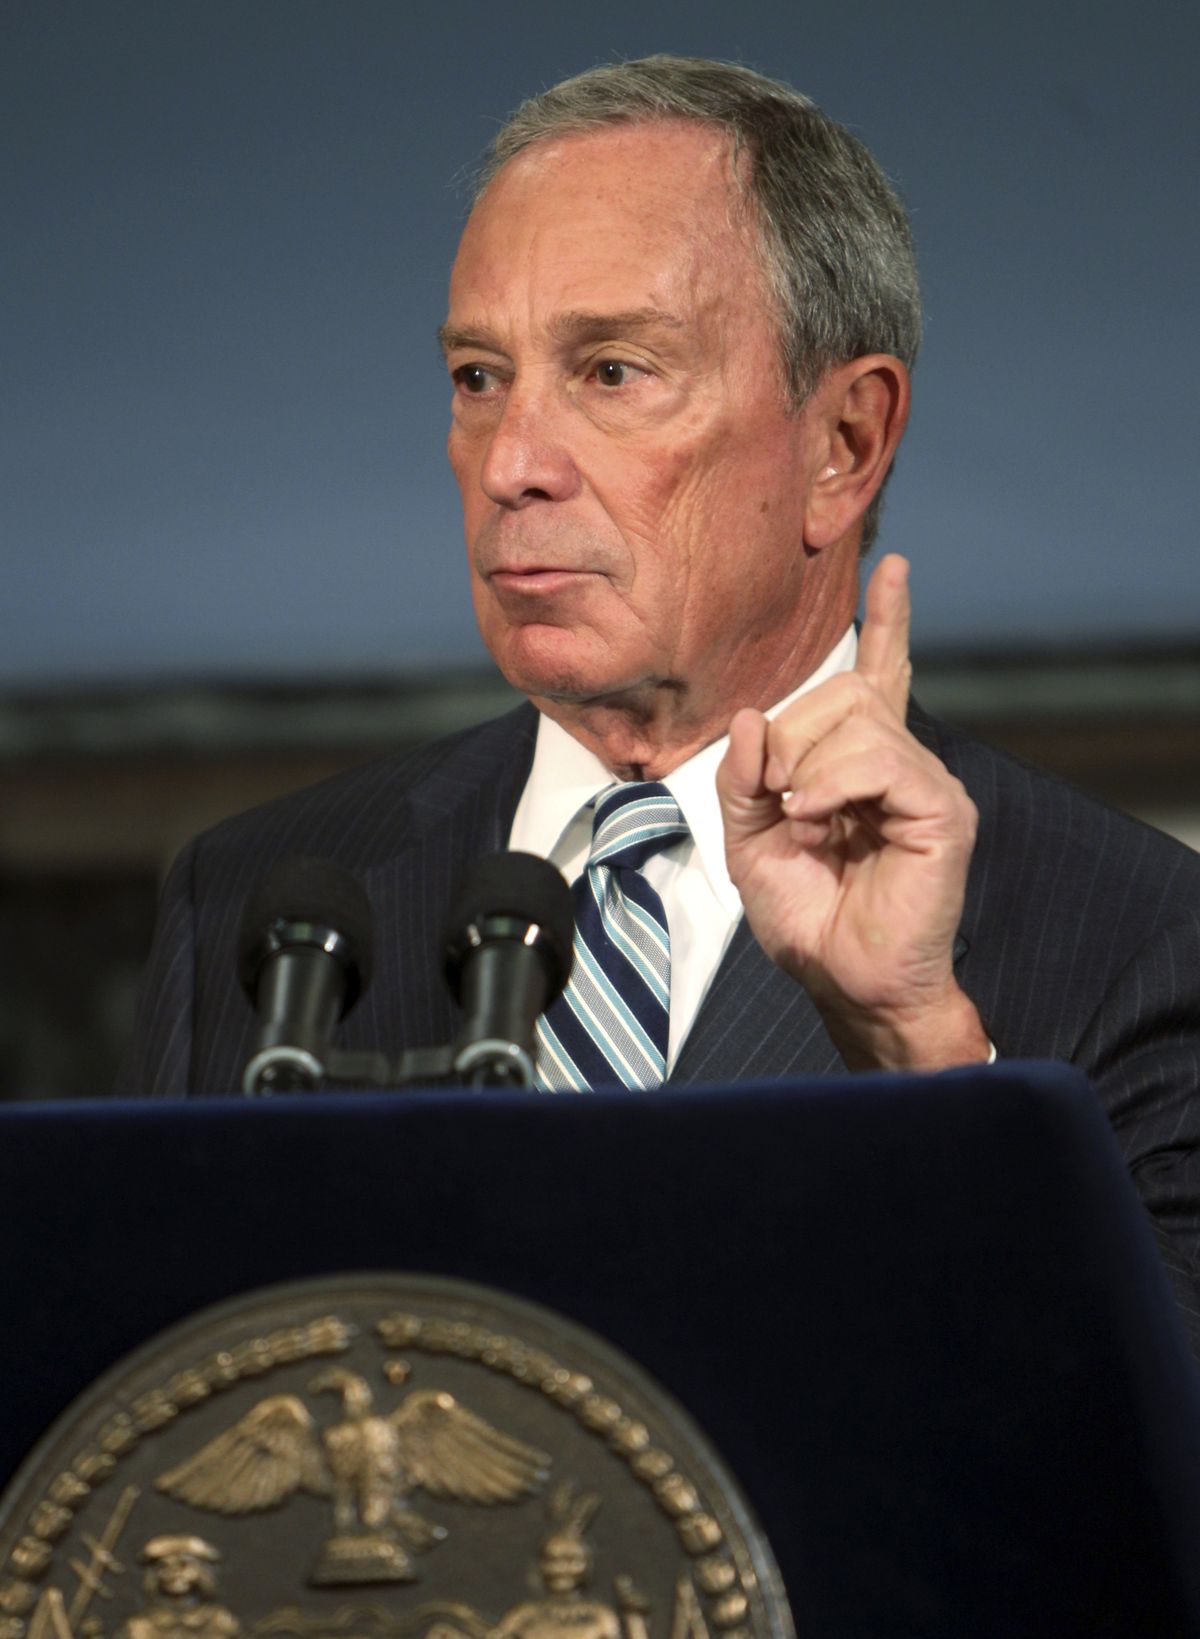 New York City Mayor Michael Bloomberg speaks at a news conference in New York, Thursday, Sept. 13, 2012. New York City cracked down on supersized sodas and other sugary drinks Thursday in what is celebrated as a groundbreaking attempt to curb obesity and condemned as a breathtaking intrusion into people